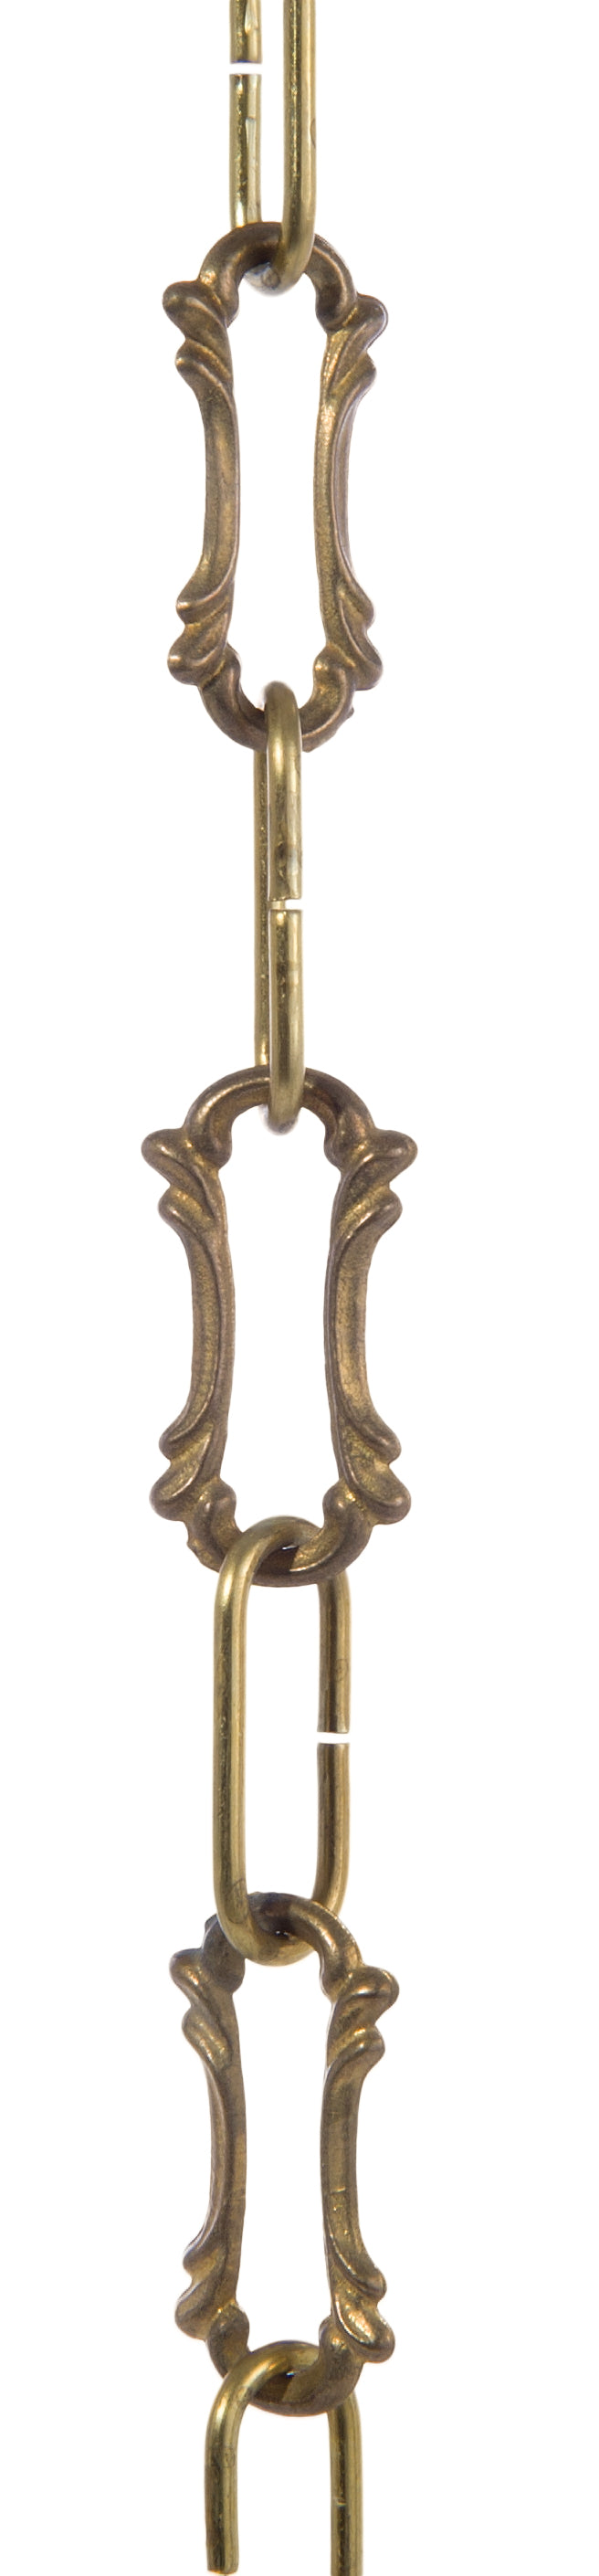 Cast Brass Antique Style Lamp Chain, Unfinished